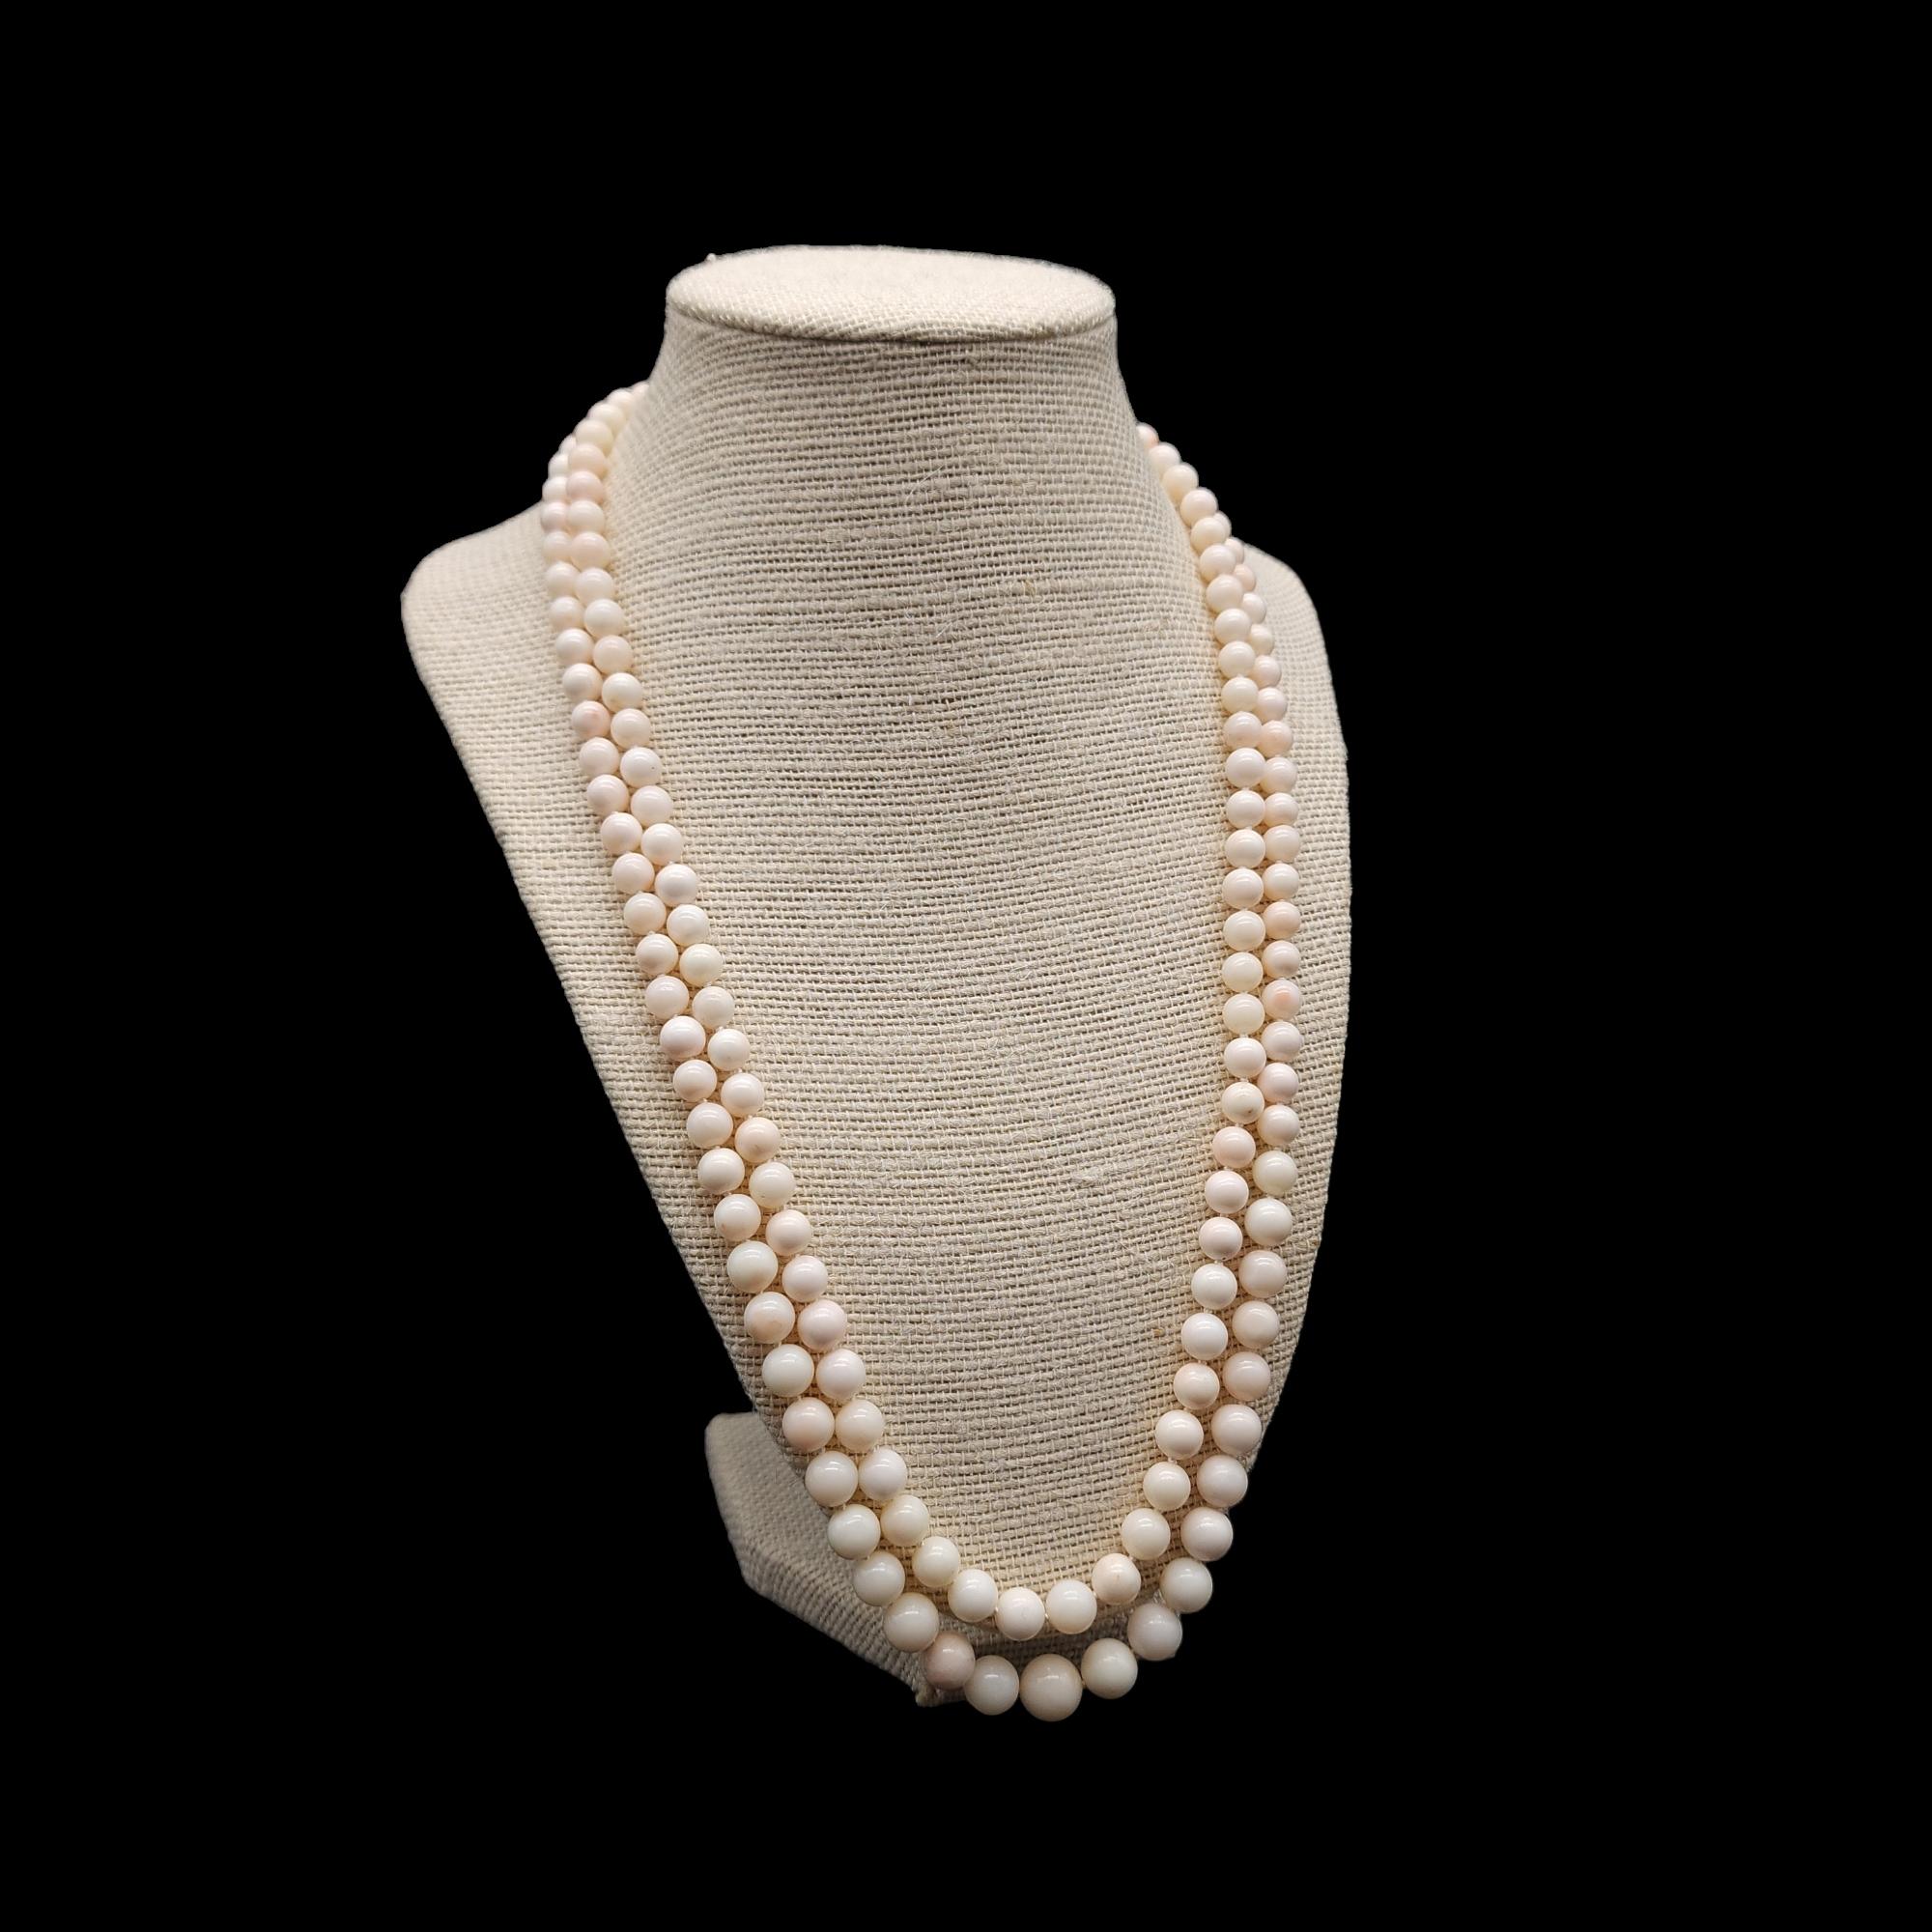 Add a touch of elegance and charm to your outfit with this vintage double strand necklace. This stunning piece features natural angel-skin coral beads in a soft off-white and pink hue The beads are hand-knotted and have a smooth, round shape. The